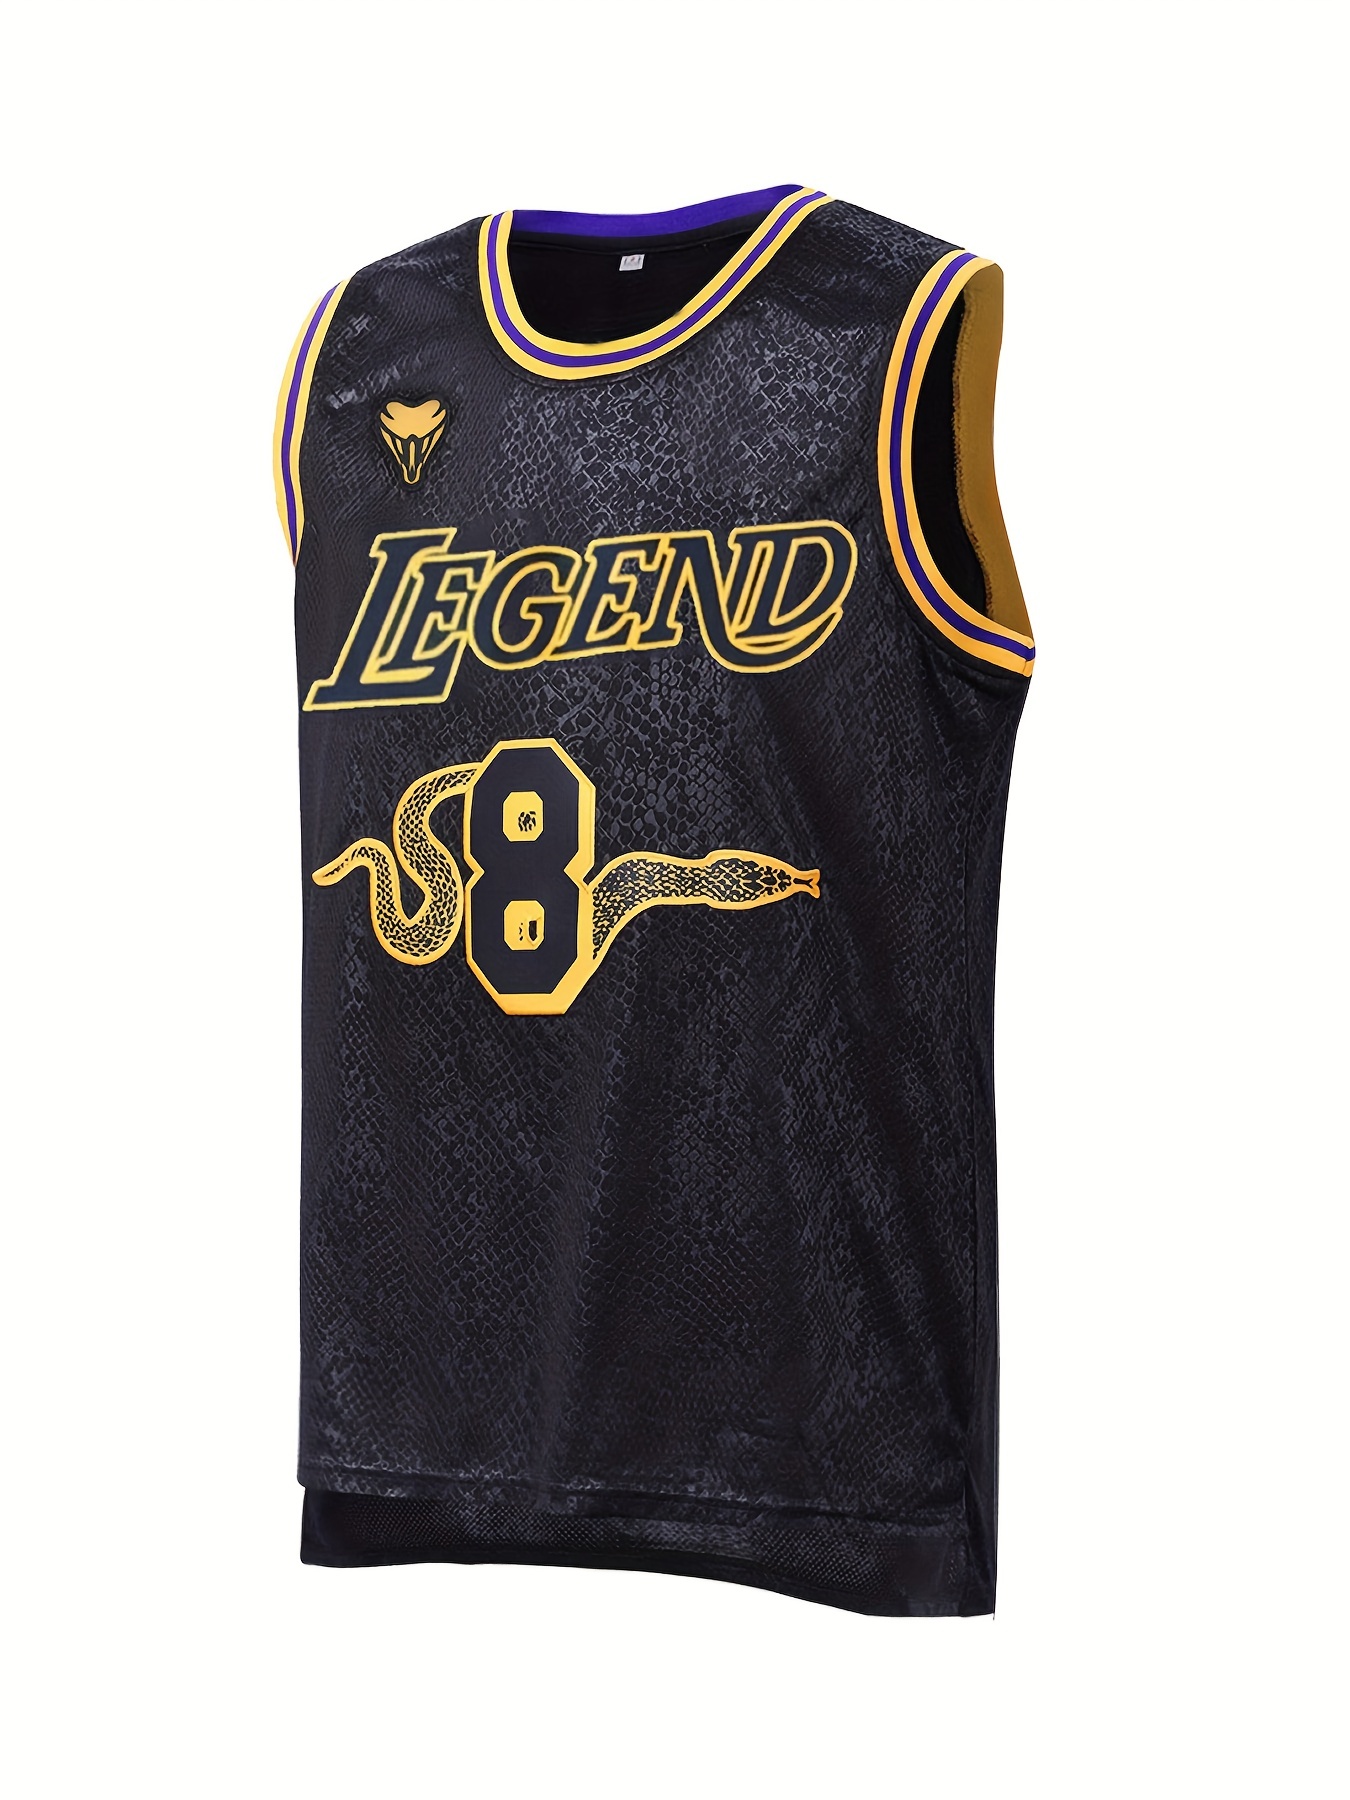 Men's Legend #824 Embroidered Basketball Jersey, Active Retro Round Neck Sleeveless Uniform Basketball Shirt for Training Competition,Temu